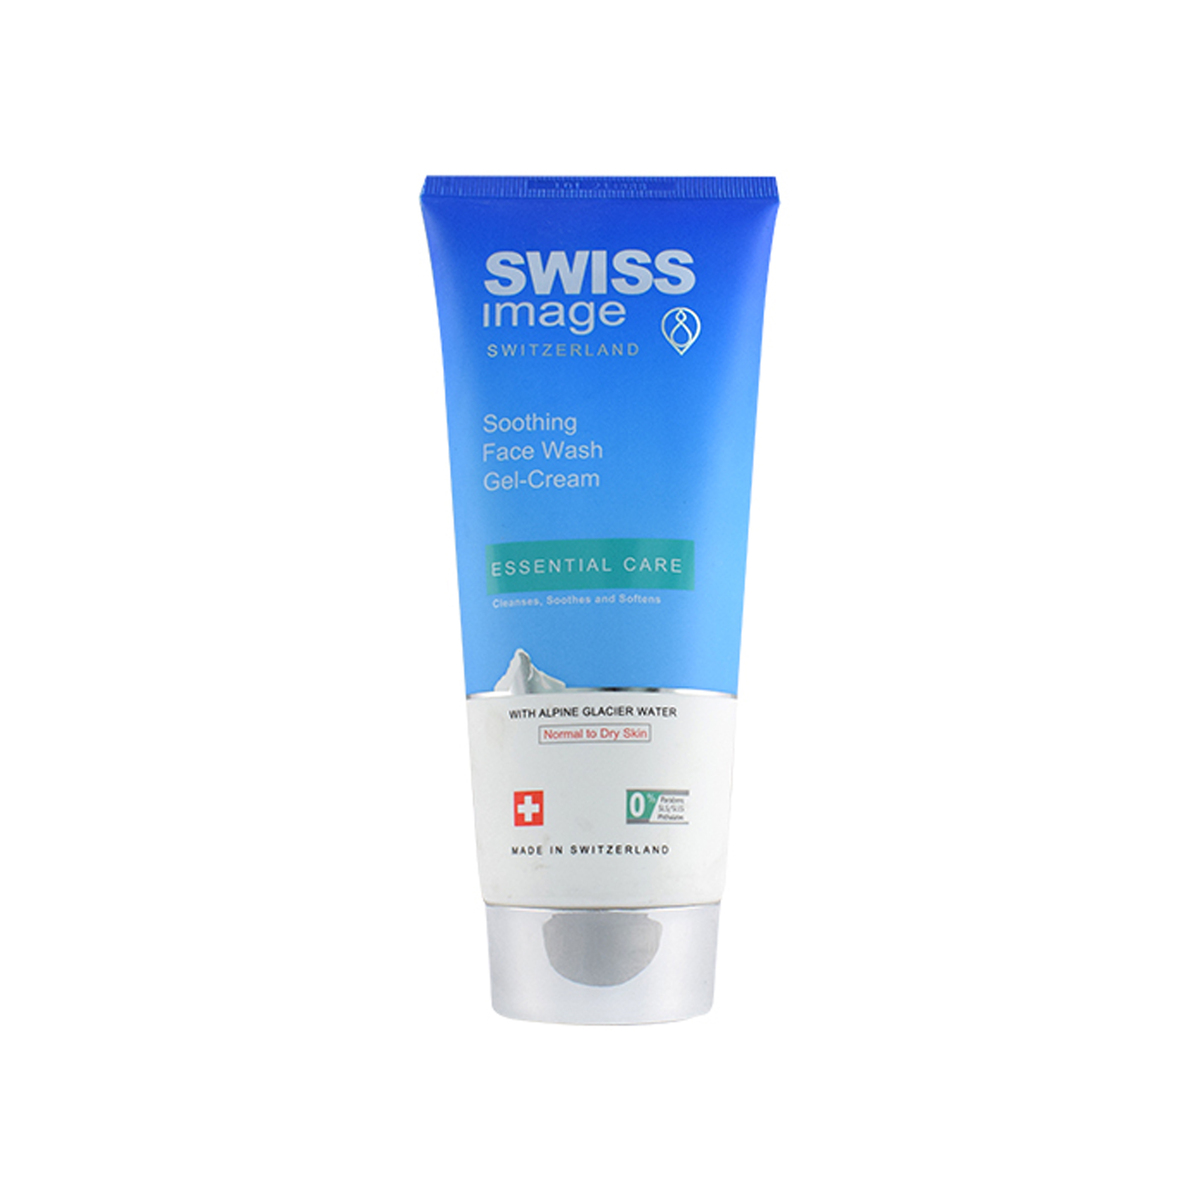 Swisss Image Essential Care Soothing Face Wash Gel Cream 200ml